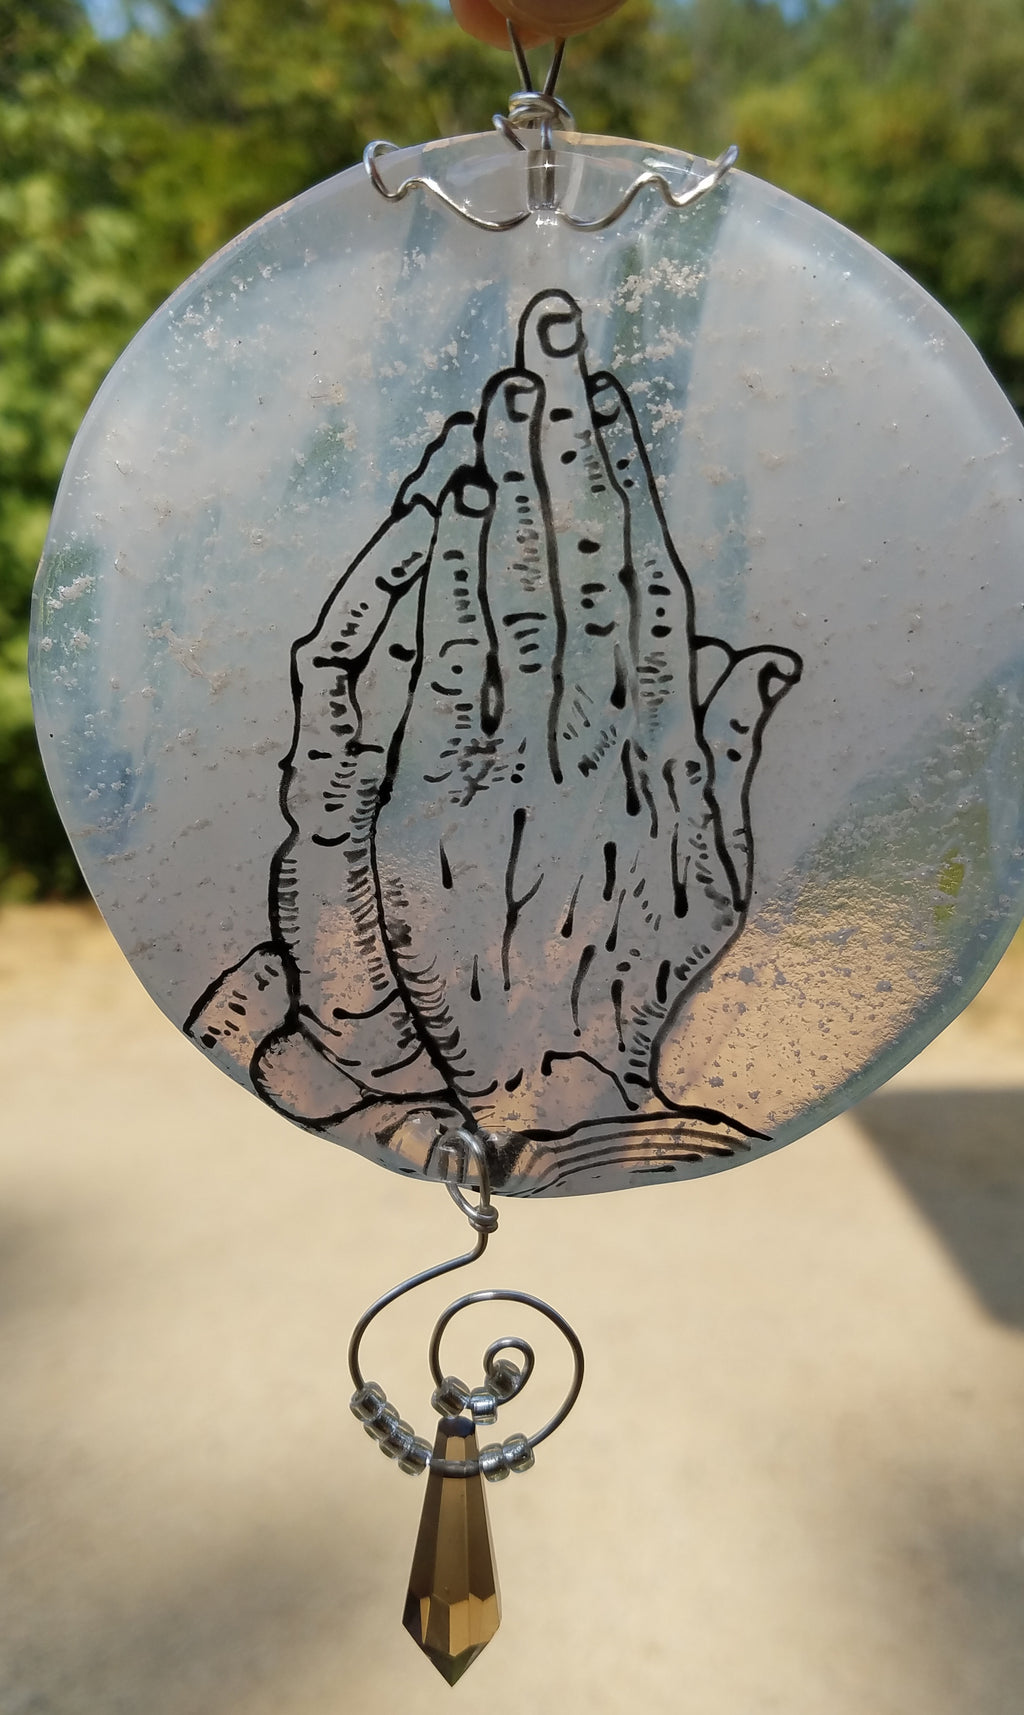 praying hands suncatcher Unique Celebration of life Funeral Memorials. Ashes in Glass Cremation Glass Art Sculptures, Cremation Wind Chimes, Cremation Sun Catchers, Table Displays, & Cremation Jewelry Custom USA Handmade by Infusion Glass. Ashes Infused Glass Human and Pet Cremation Ash Urns  Ashesinfusedglass.com